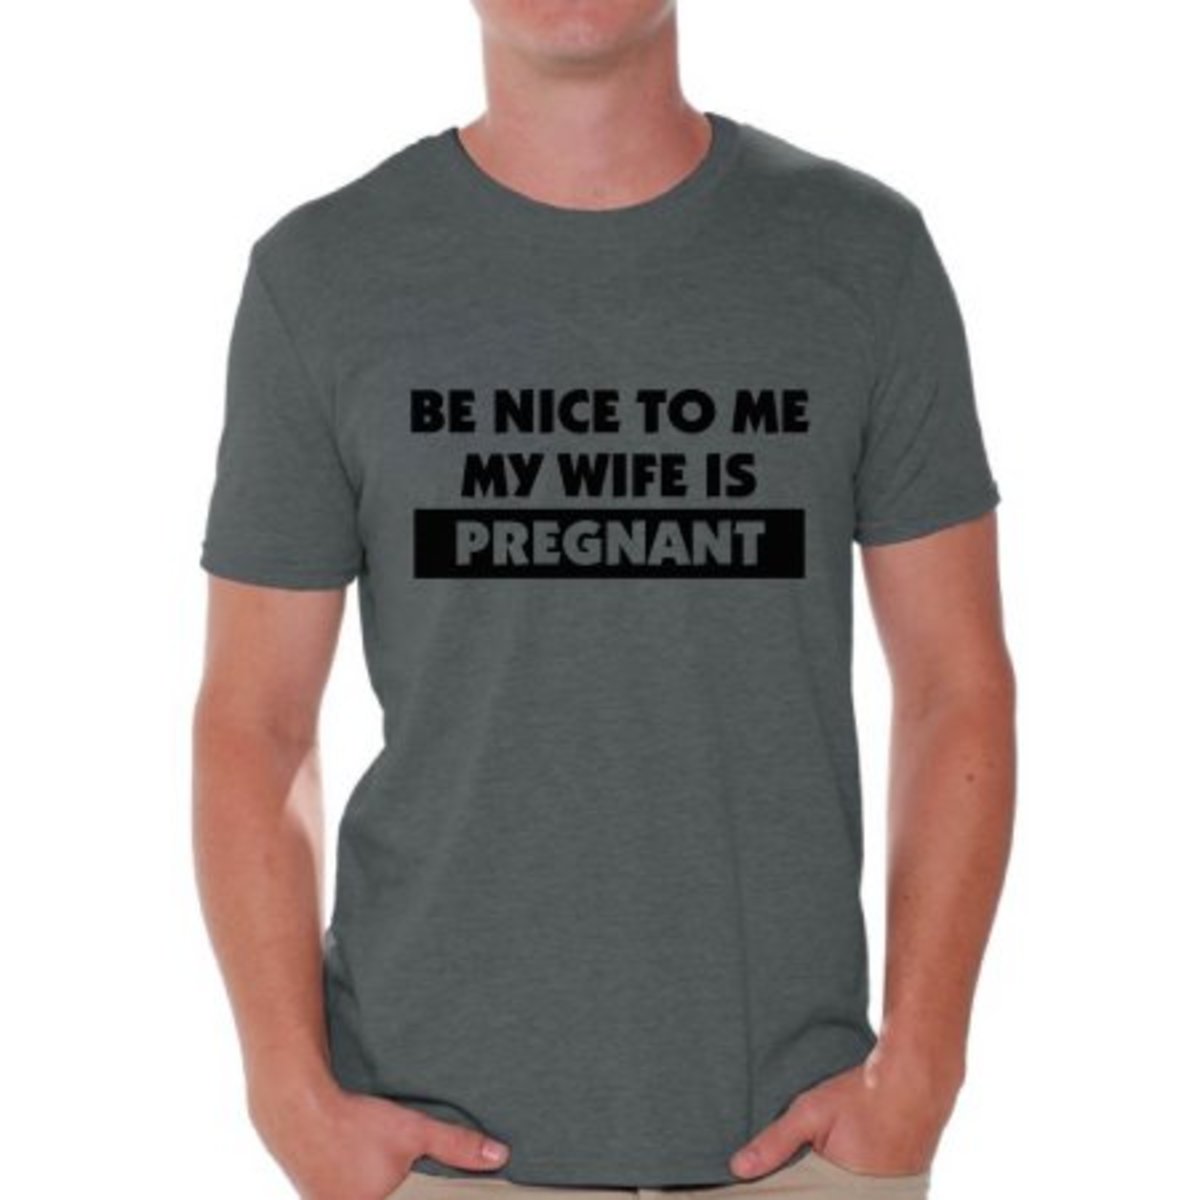 Be Nice to Me My Wife is Pregnant tee Shirt